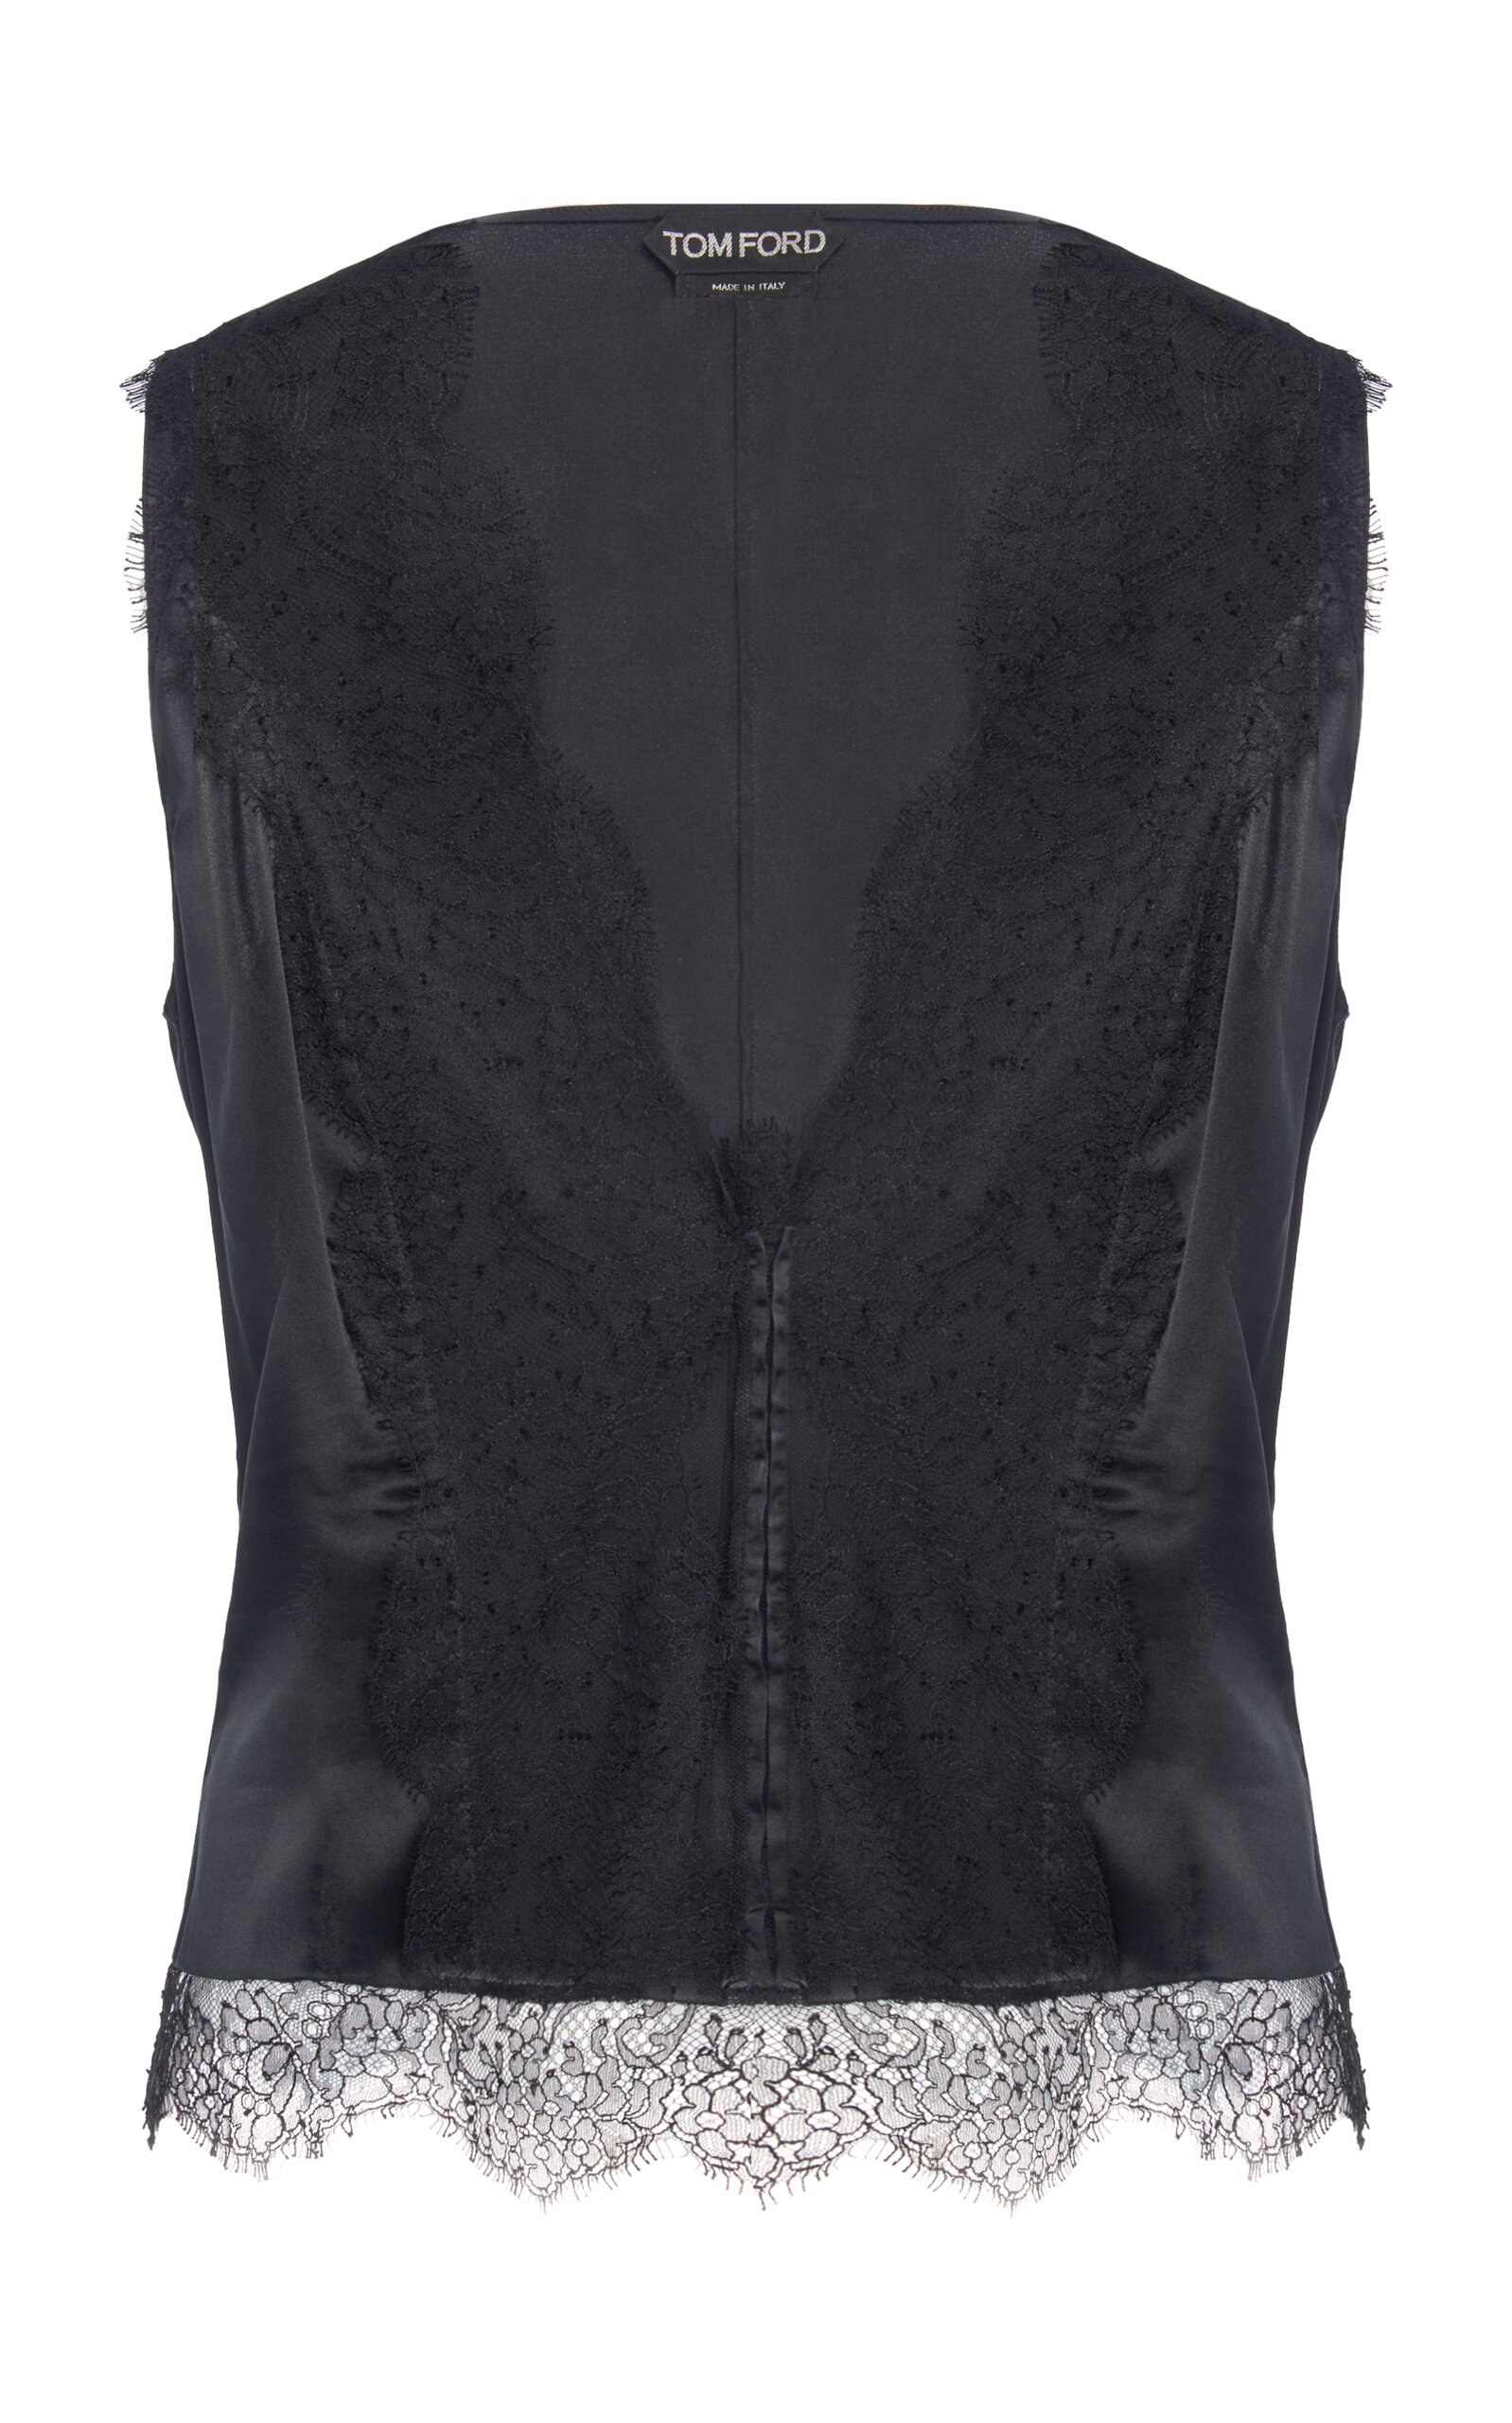 L'AGENCE Lexi Silk Camisole in Charcoal Grey